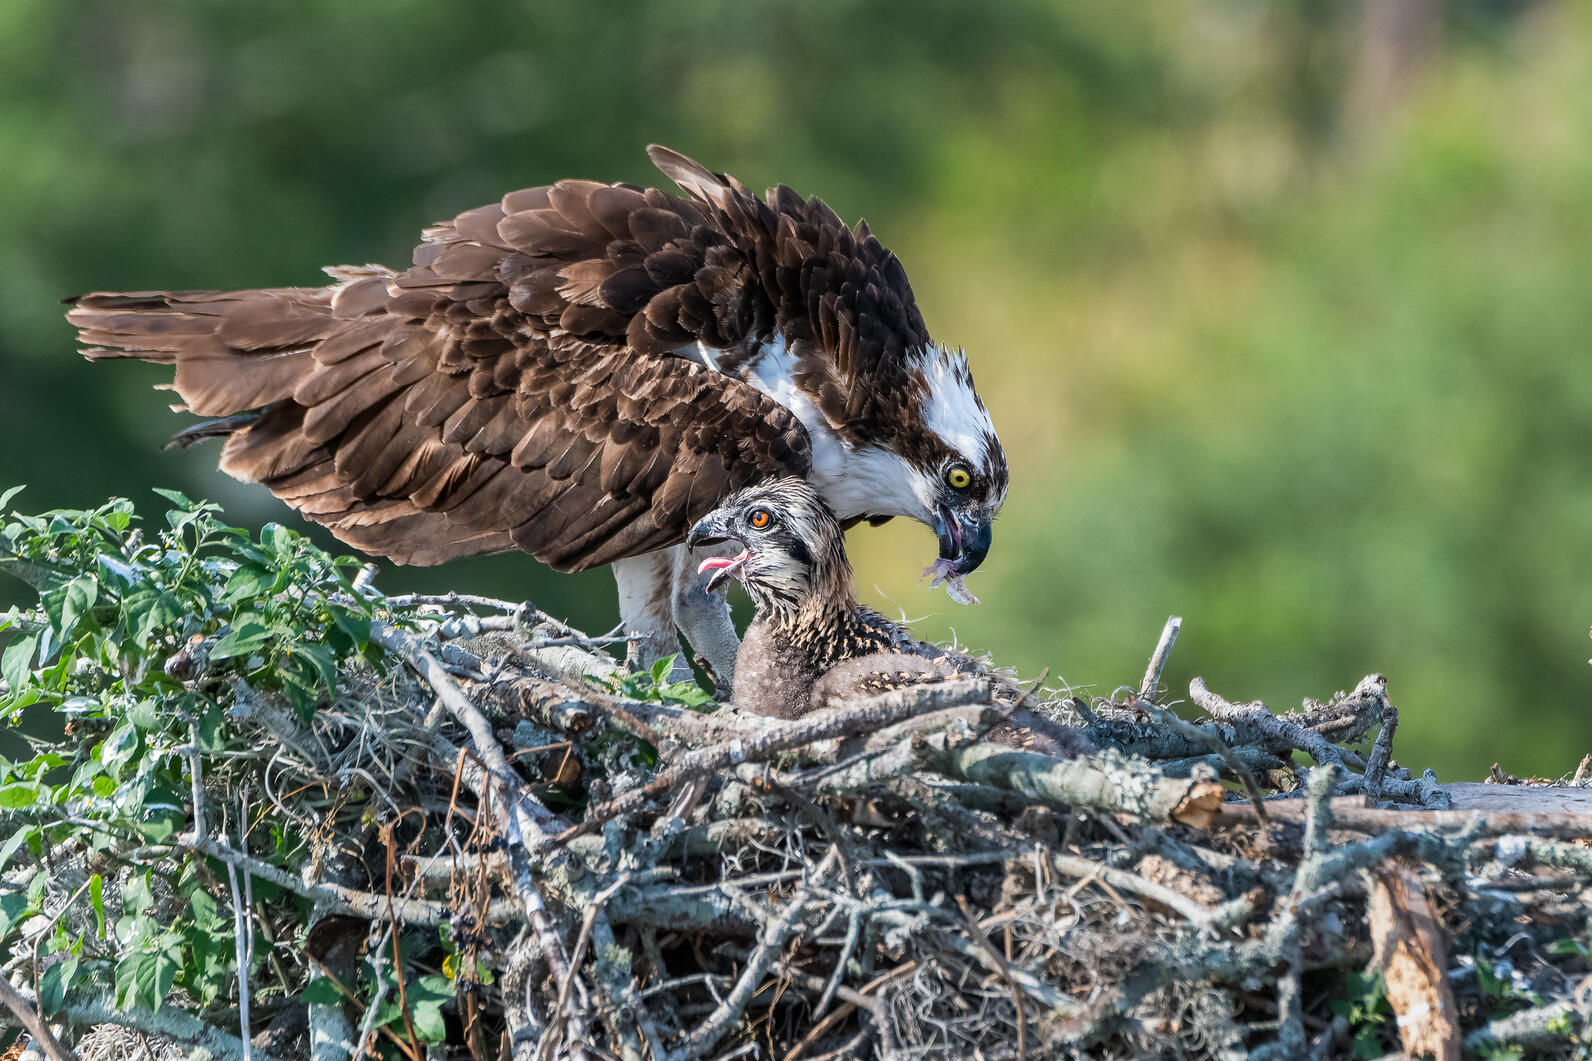 An adult Osprey sits in a large nest with its chick.